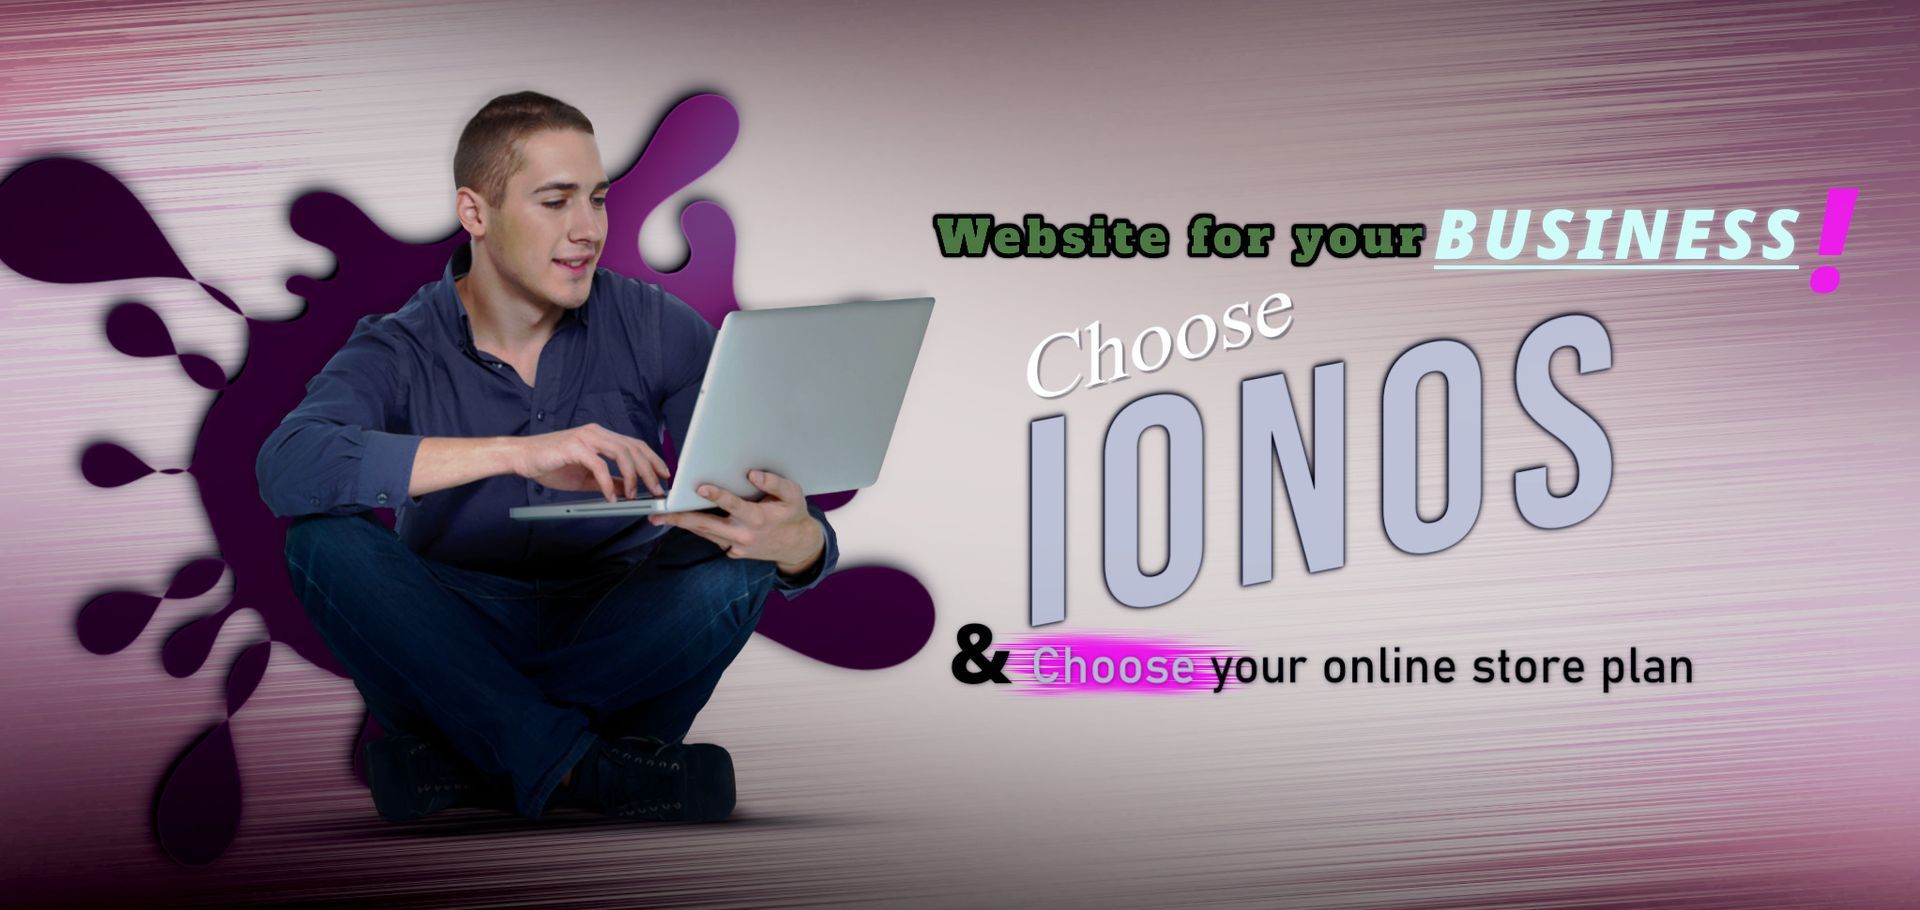 Your digital journey starts here! 🌐✨ Explore our website plans tailored for businesses of all sizes. From powerful features to seamless performance, choose the plan that suits your vision. Transform your online presence with IONOS. Your website, your way! 💻🚀 #IONOS #WebsiteForBusiness #ChooseYourPlan